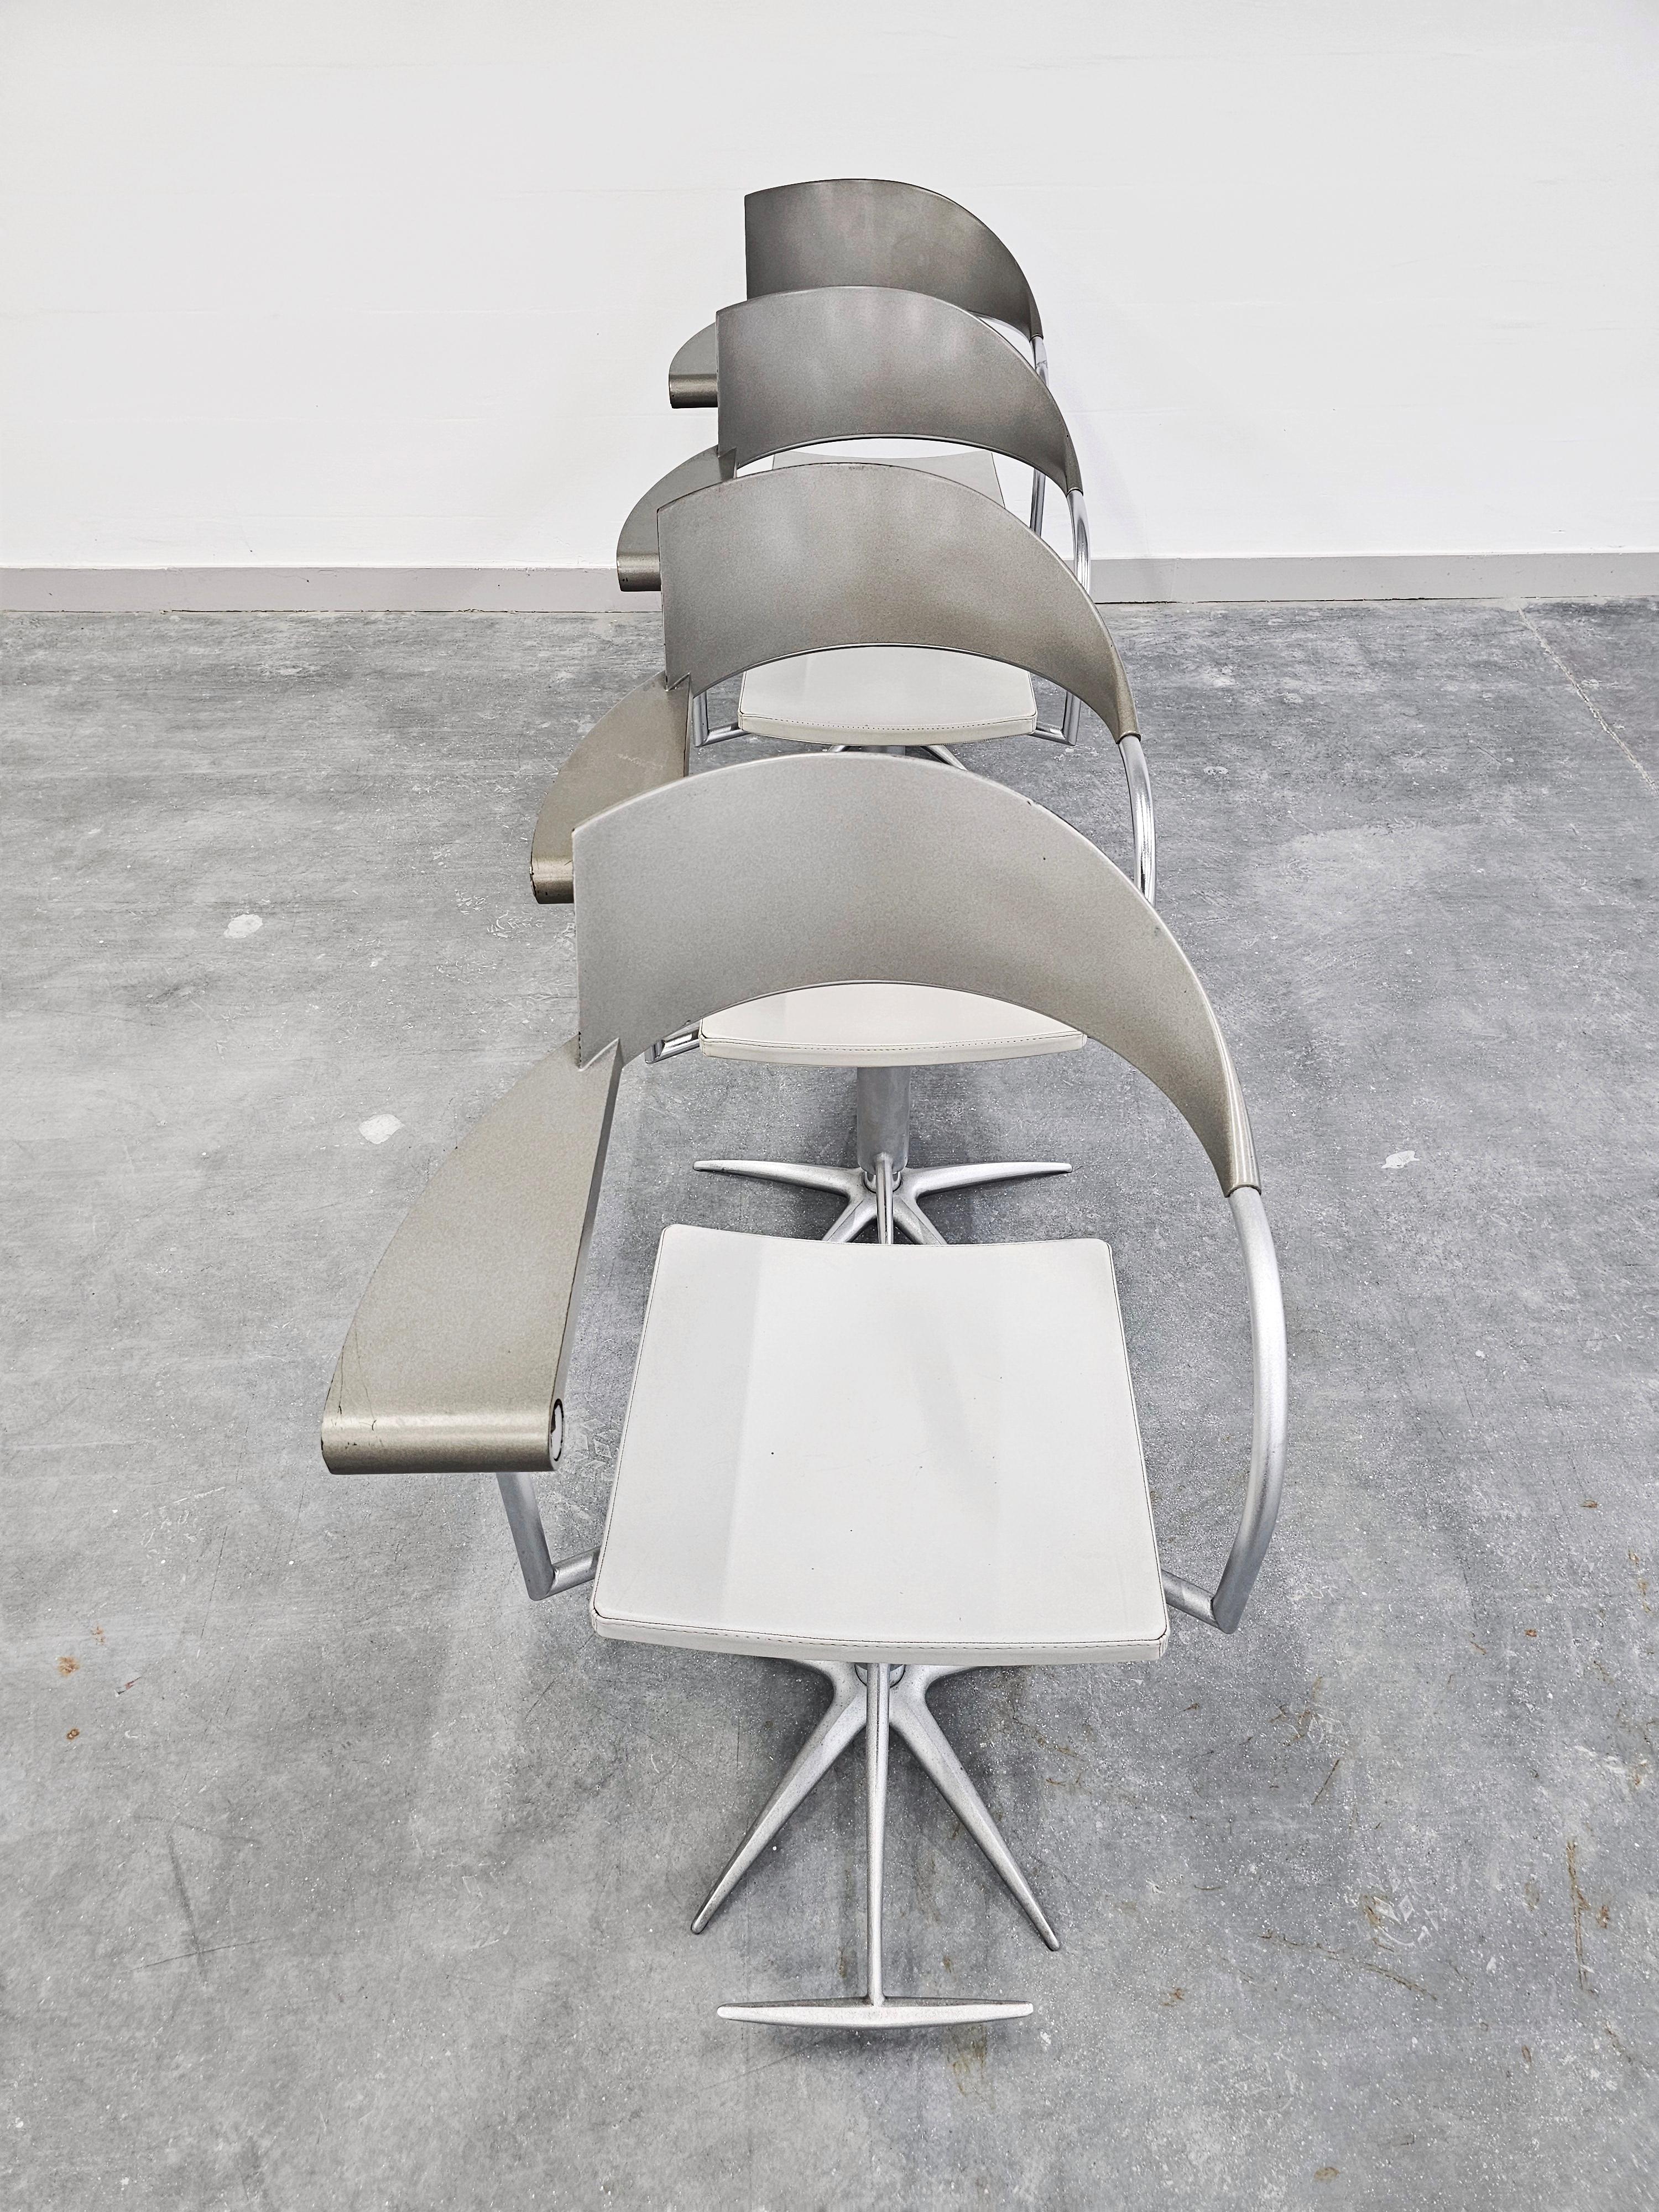 TECHNO barber chair designed by Philippe Starck for L'Oreal, France 1989 For Sale 8